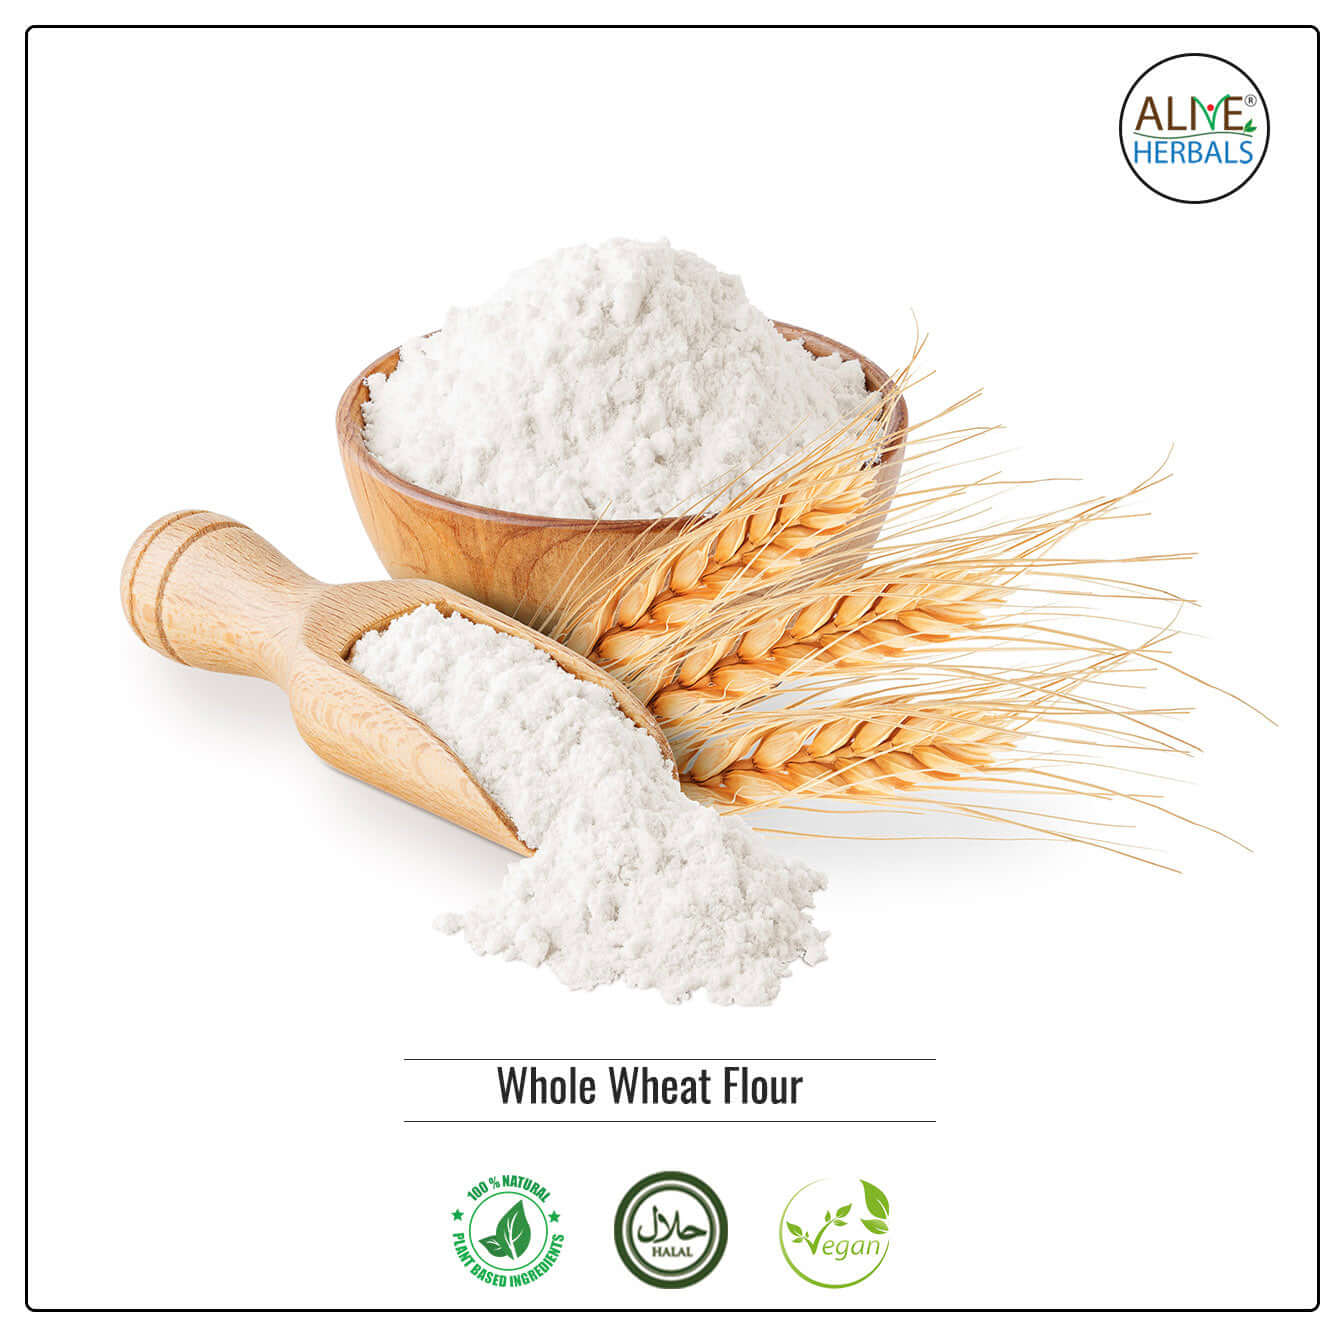 Whole Wheat Flour - Shop at Natural Food Store | Alive Herbals.